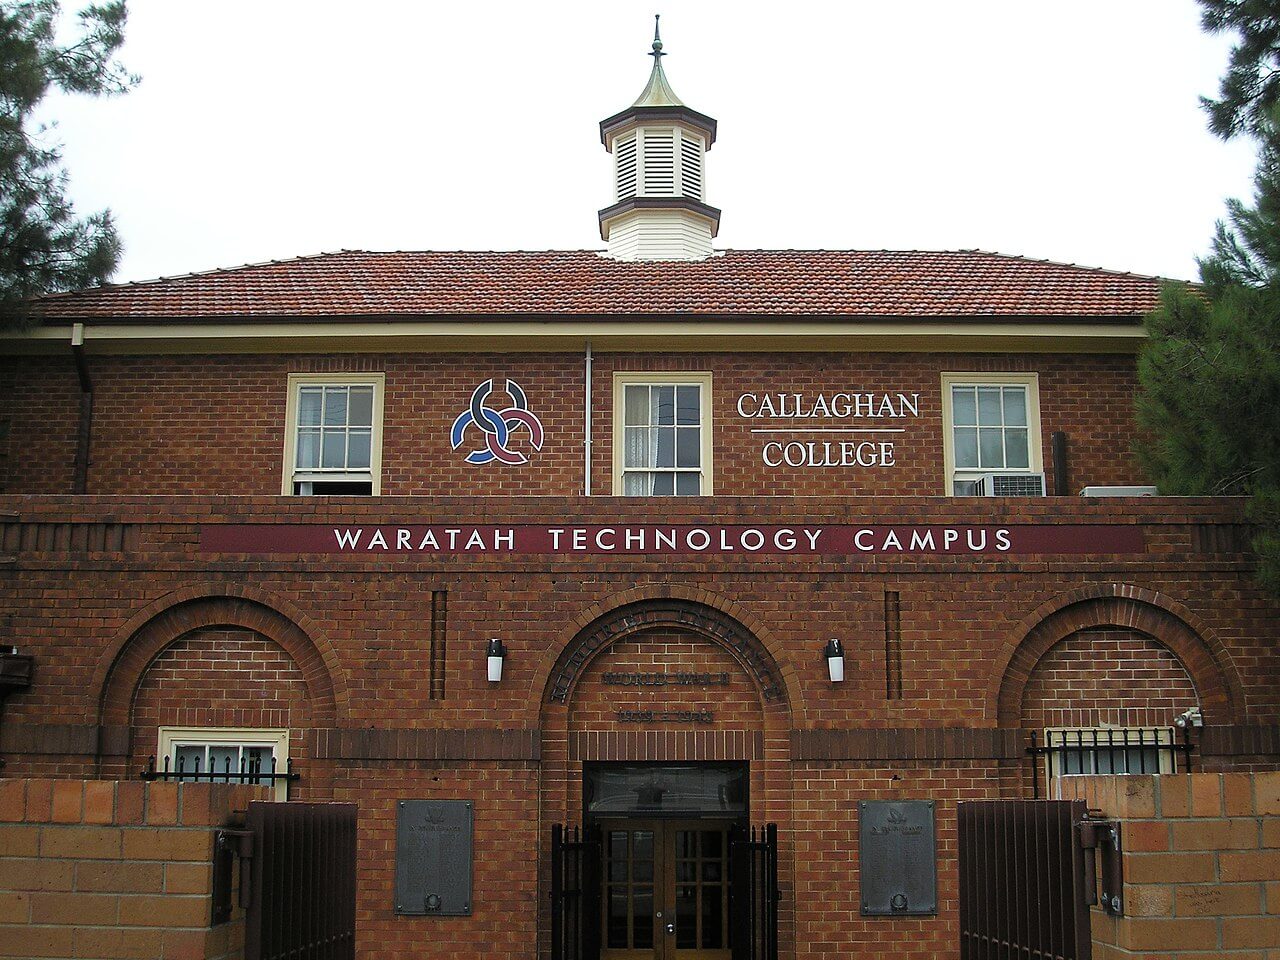 Callaghan College